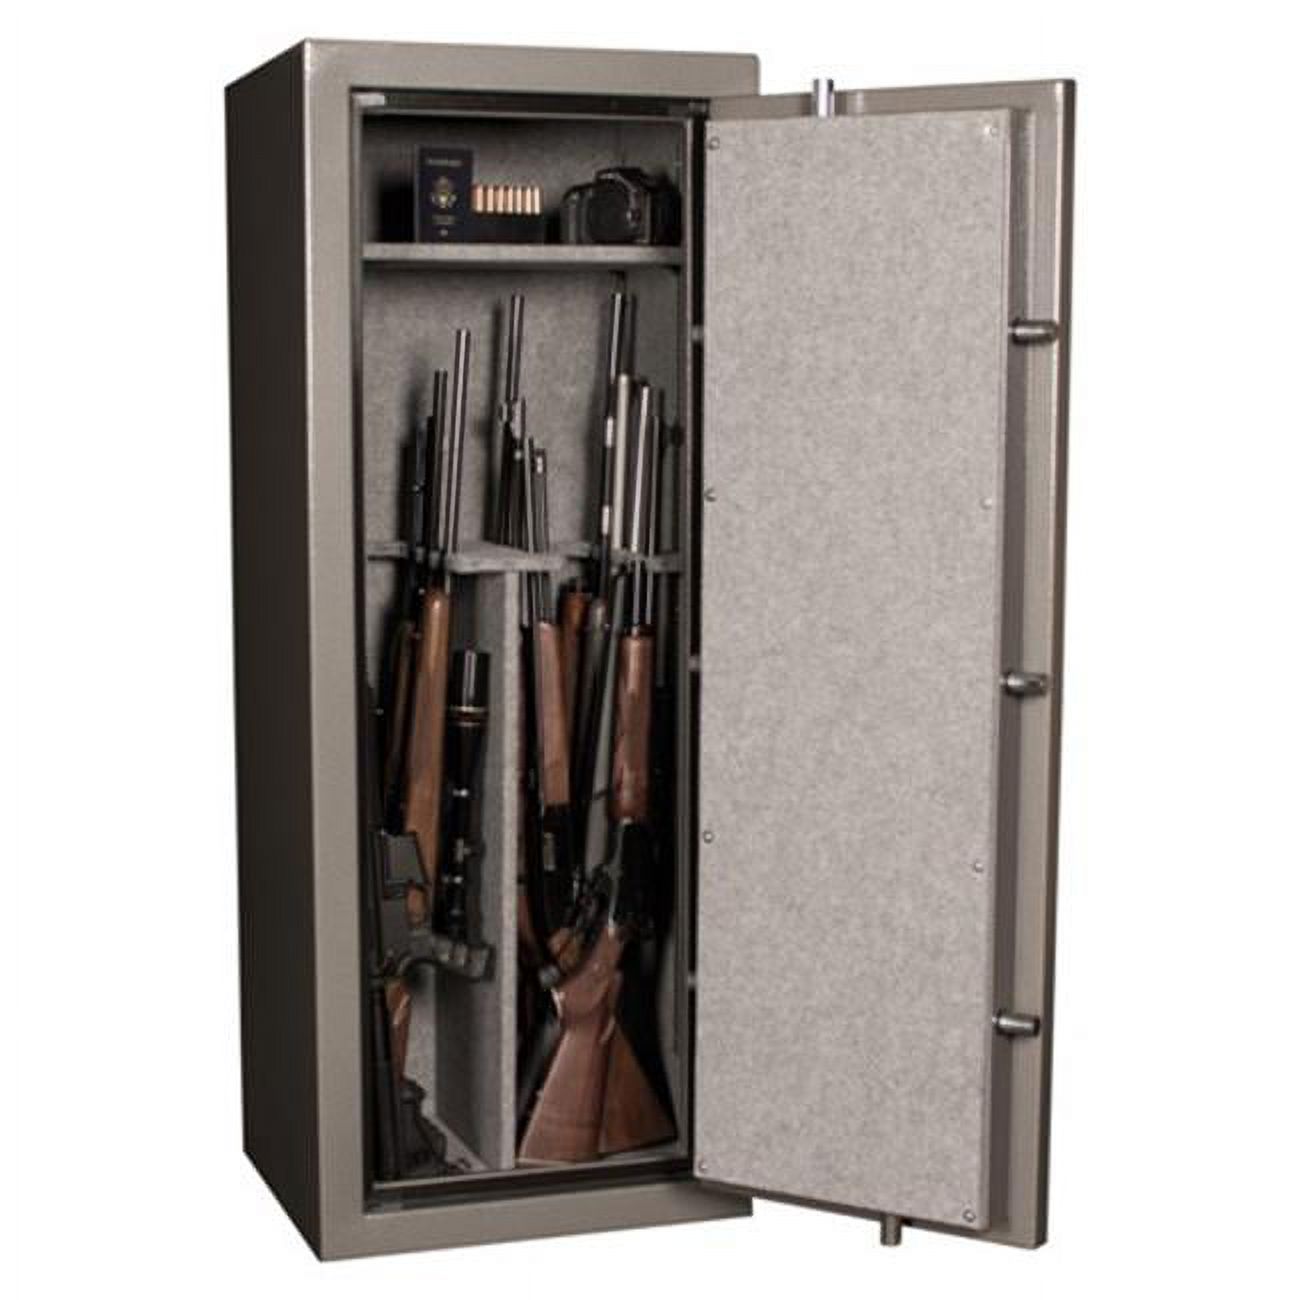 Tracker Safe TS14-GRY 14-Gun Fire Resistant Combination/Dial Lock Gun Safe, Gray - image 1 of 7